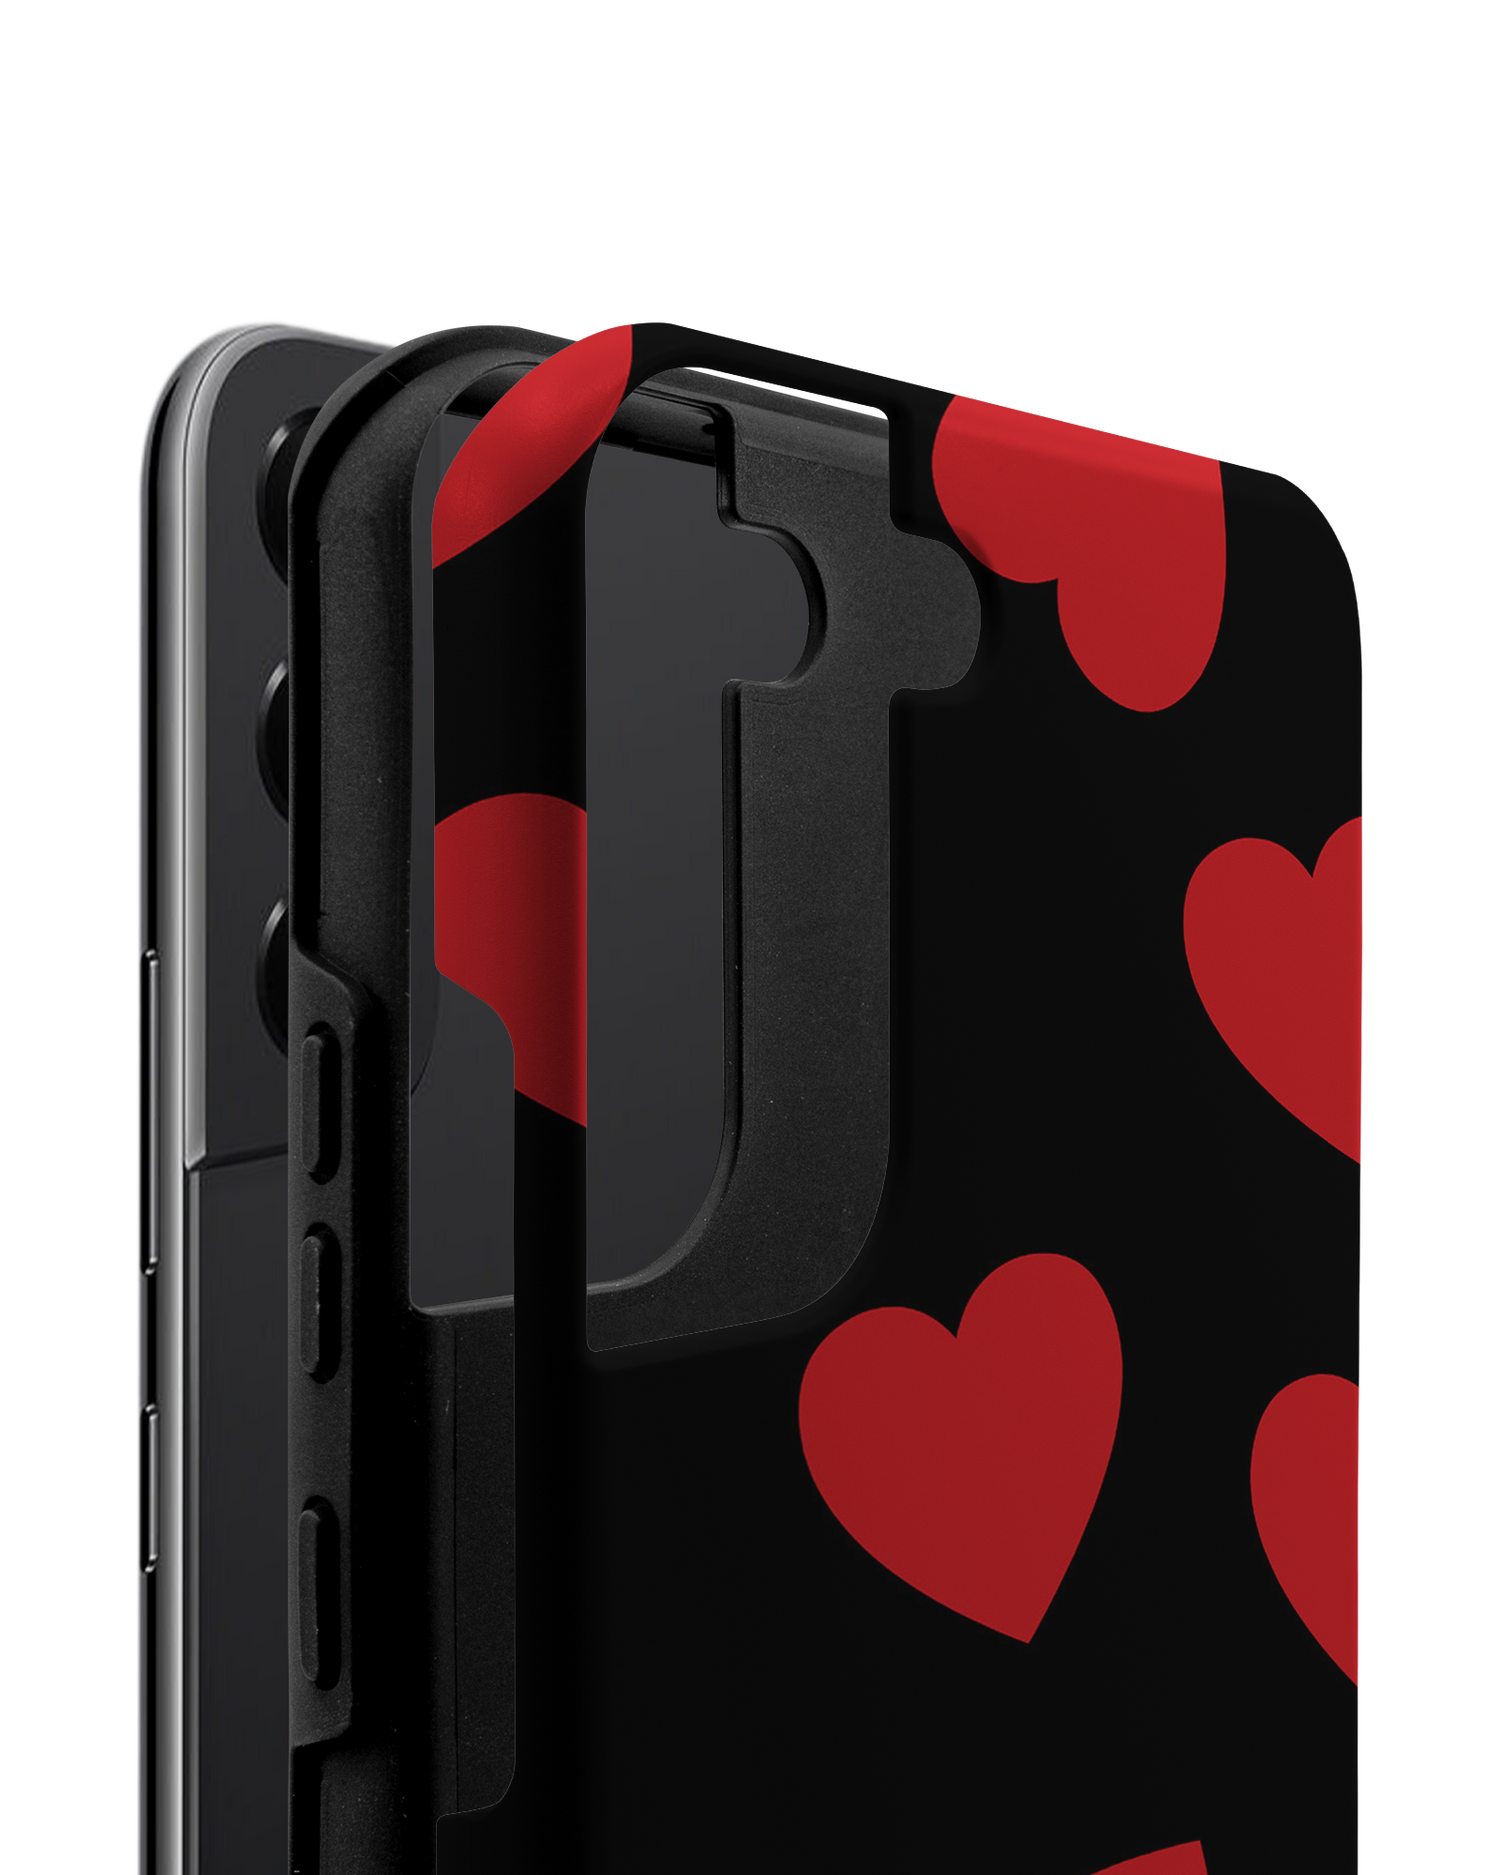 Repeating Hearts Premium Phone Case Samsung Galaxy S22 5G consisting of 2 parts